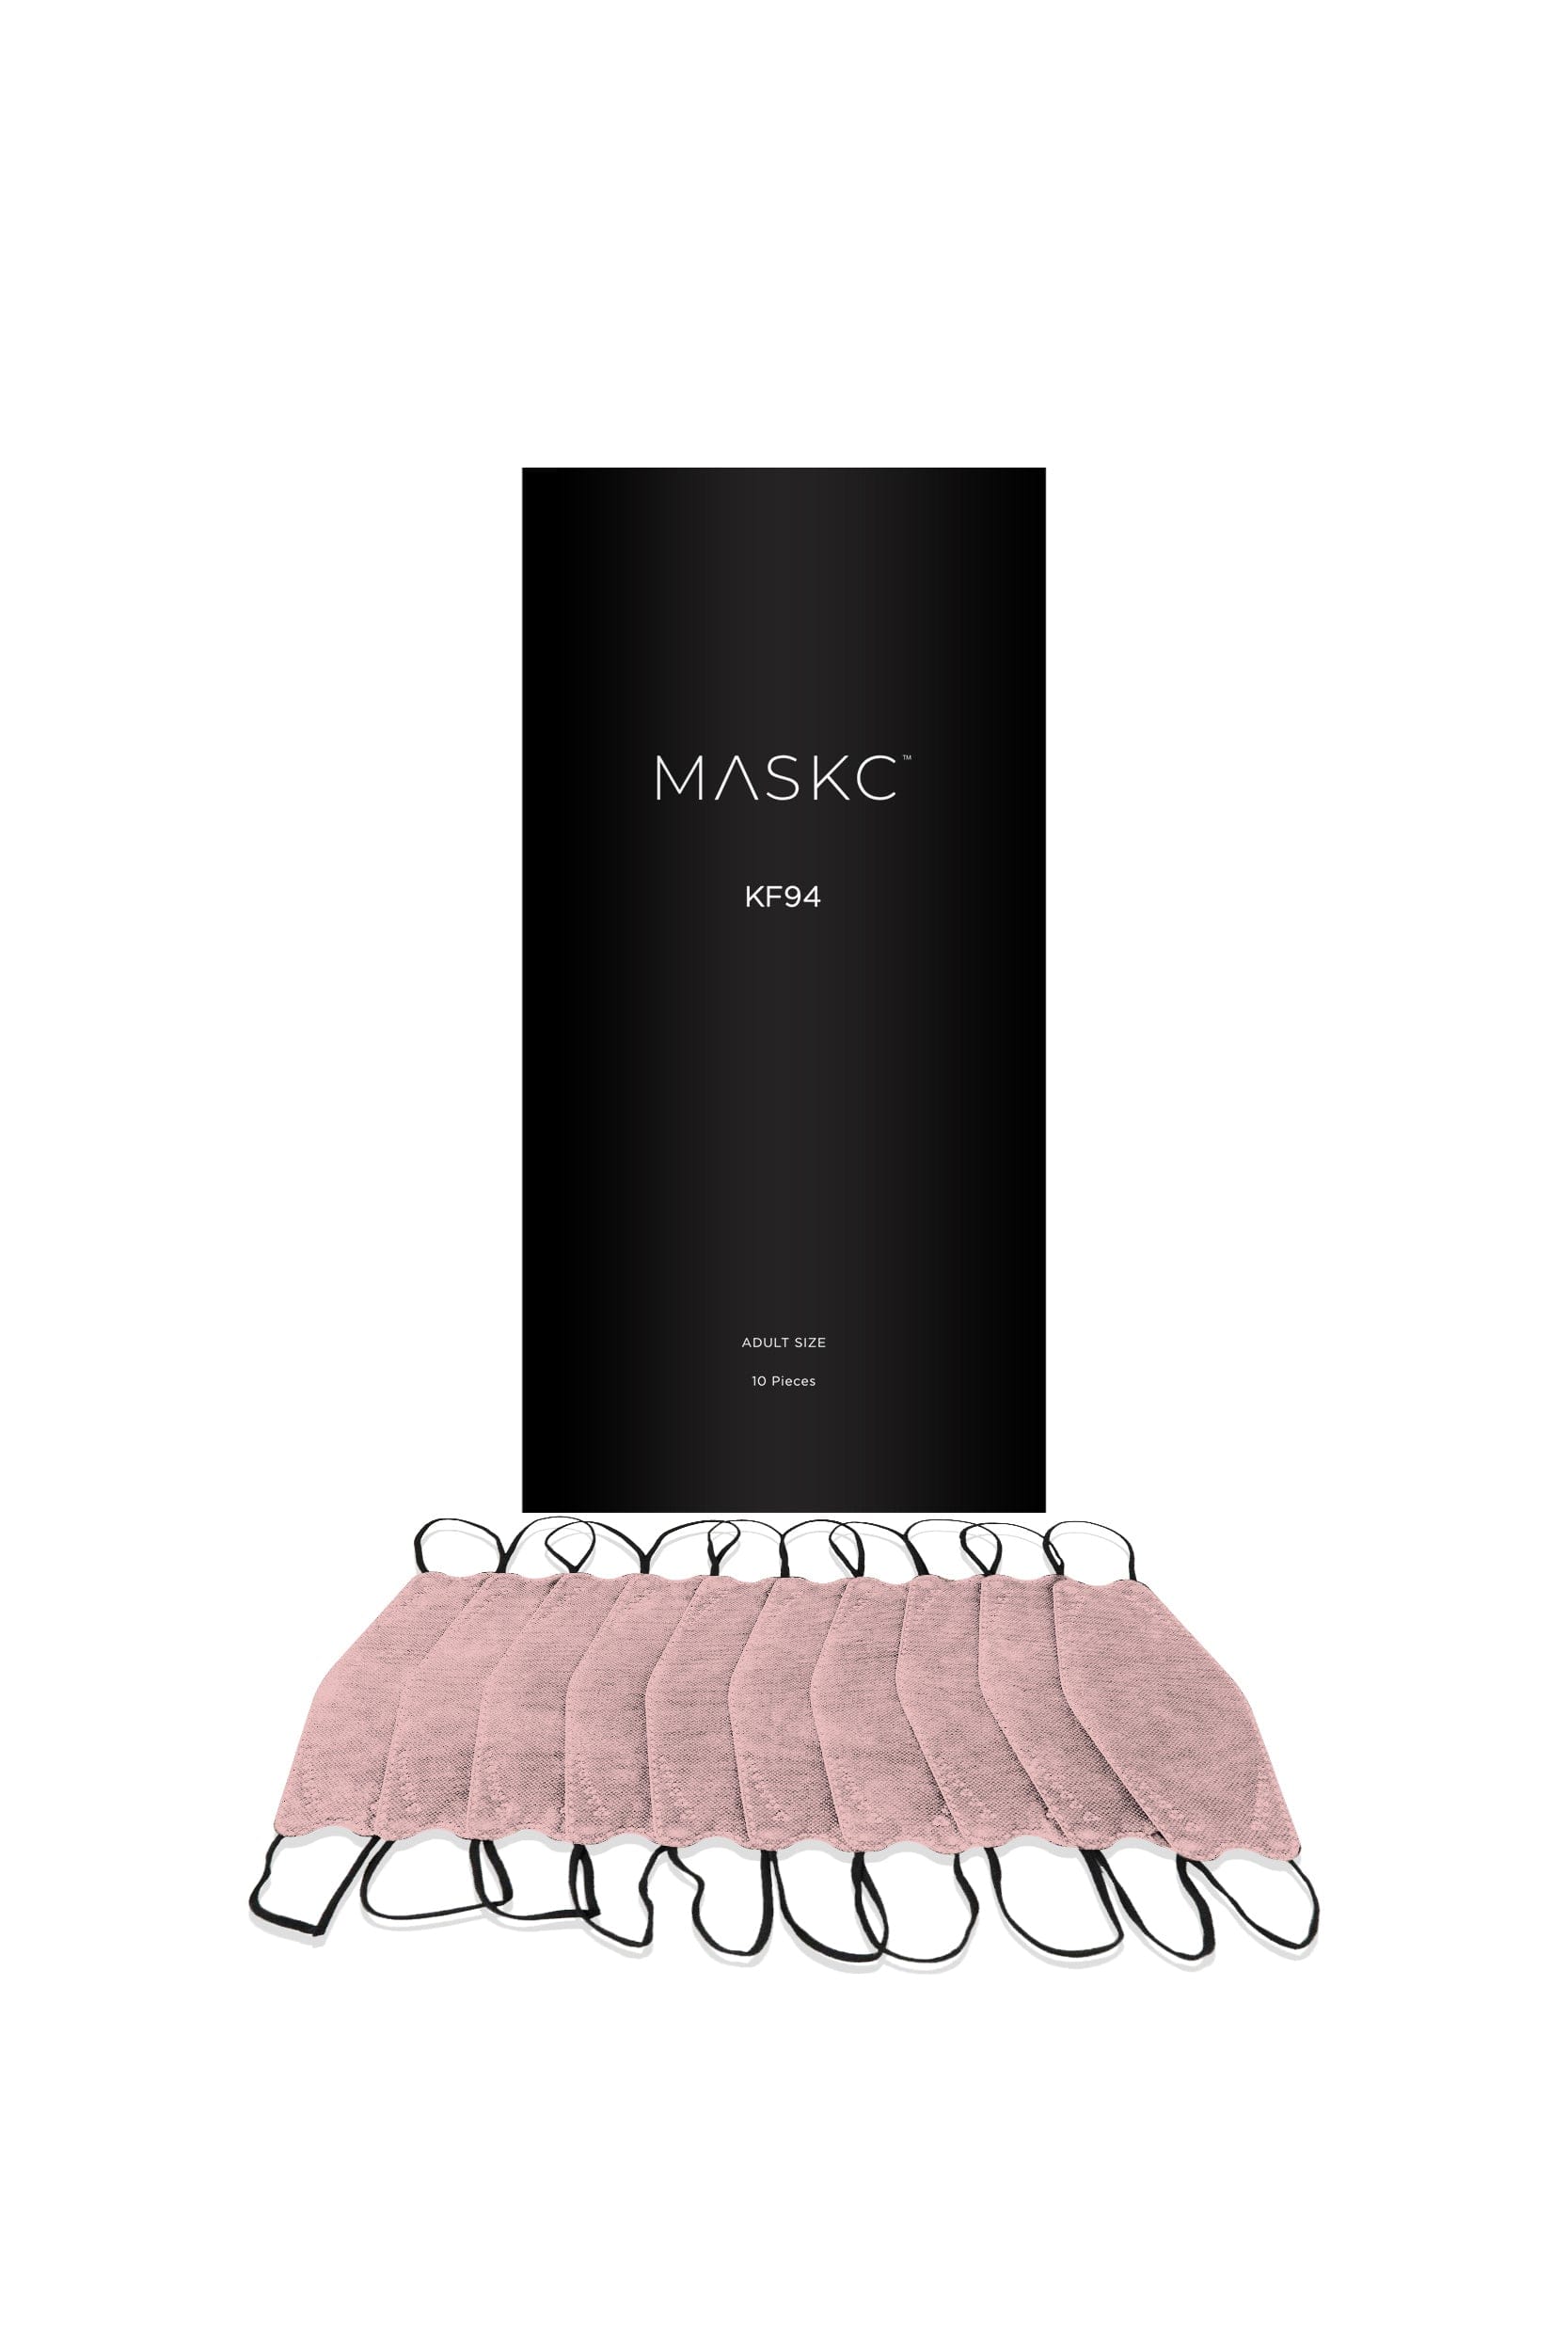 Pack of light pink KF94 face masks. Each pack contains stylish high quality face masks. 